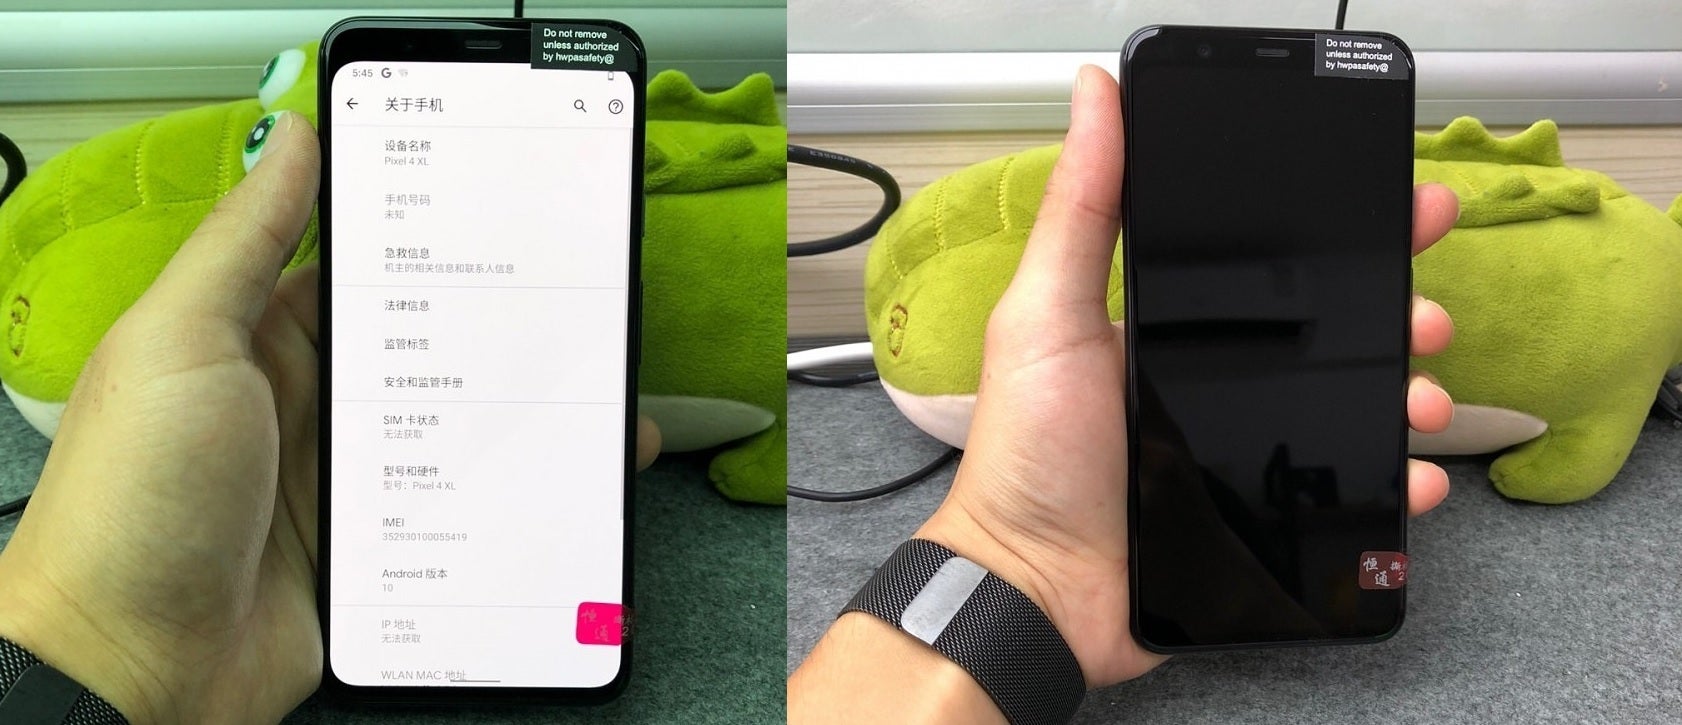 More photos of the matte gray Pixel 4 XL prototype - Google Pixel 4 XL prototype is wearing a color you&#039;ve never seen on this phone